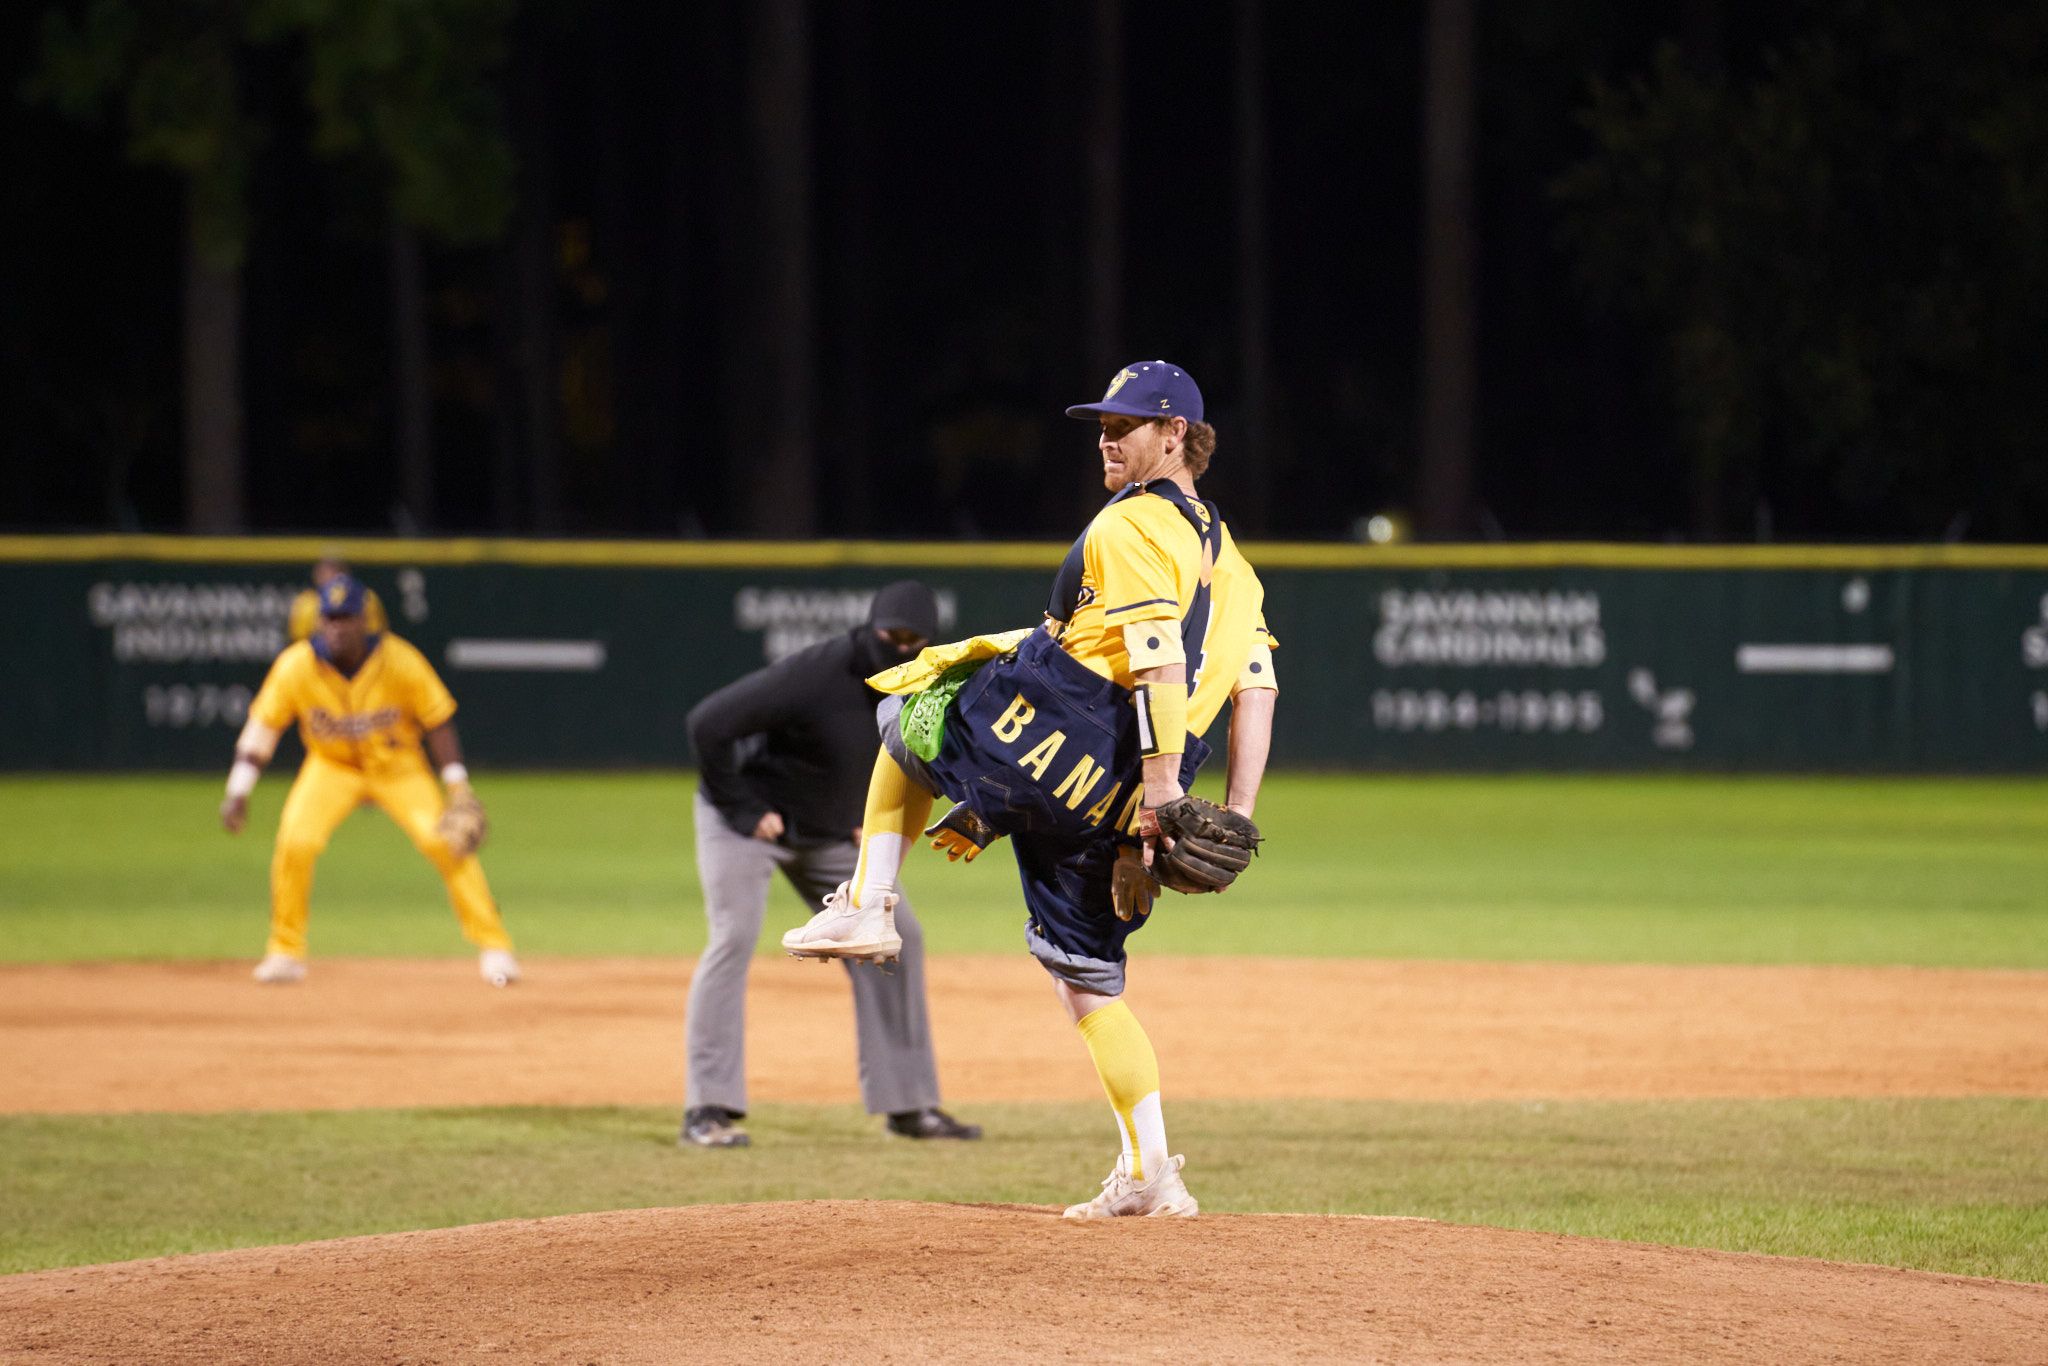 Jake Peavy pitching for the Savannah Bananas, using the actual